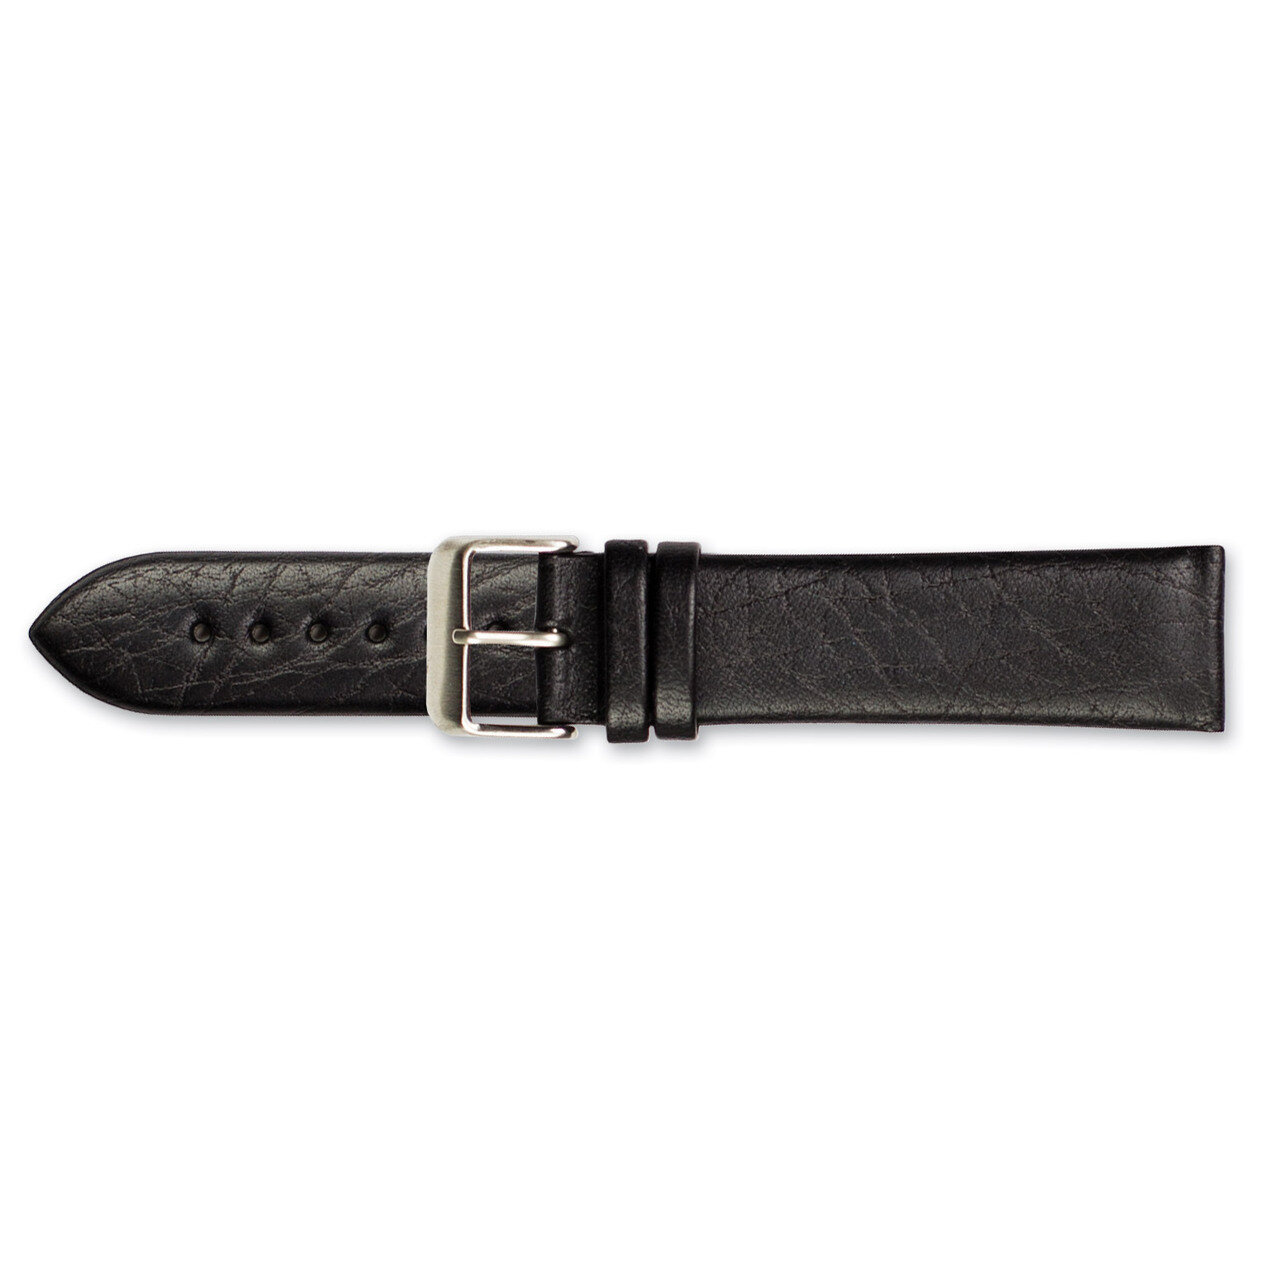 20mm Black Distrssed Leather Watch Band 7.75 Inch Silver-tone Buckle BAW319-20